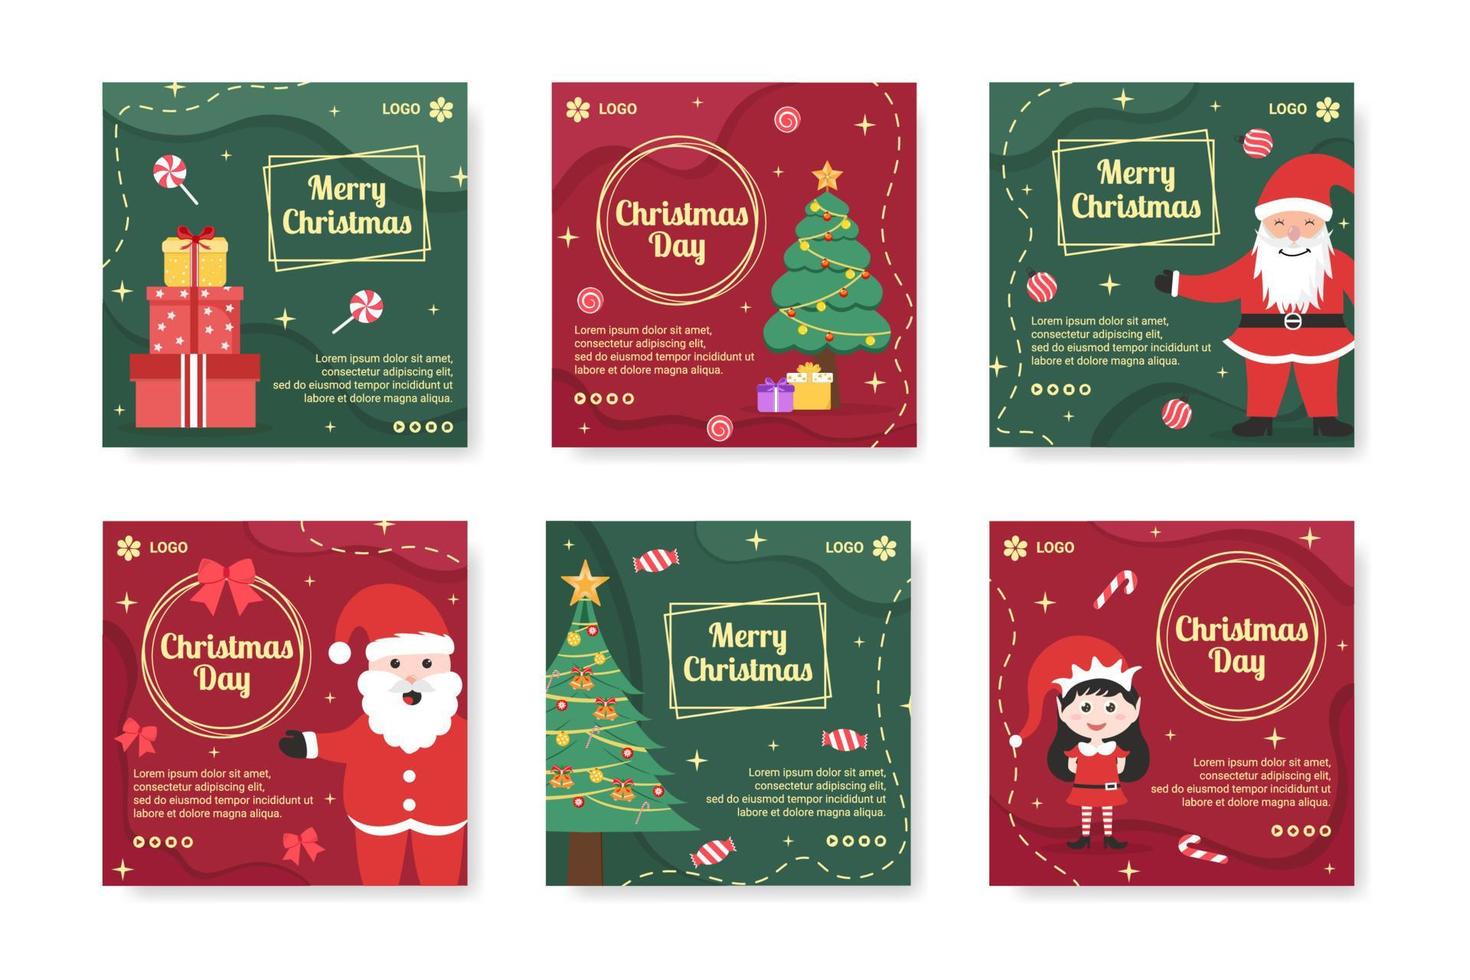 Merry Christmas Day Post Template Flat Design Illustration Editable of Square Background Suitable for Social media, Card, Greetings and Web Internet Ads vector